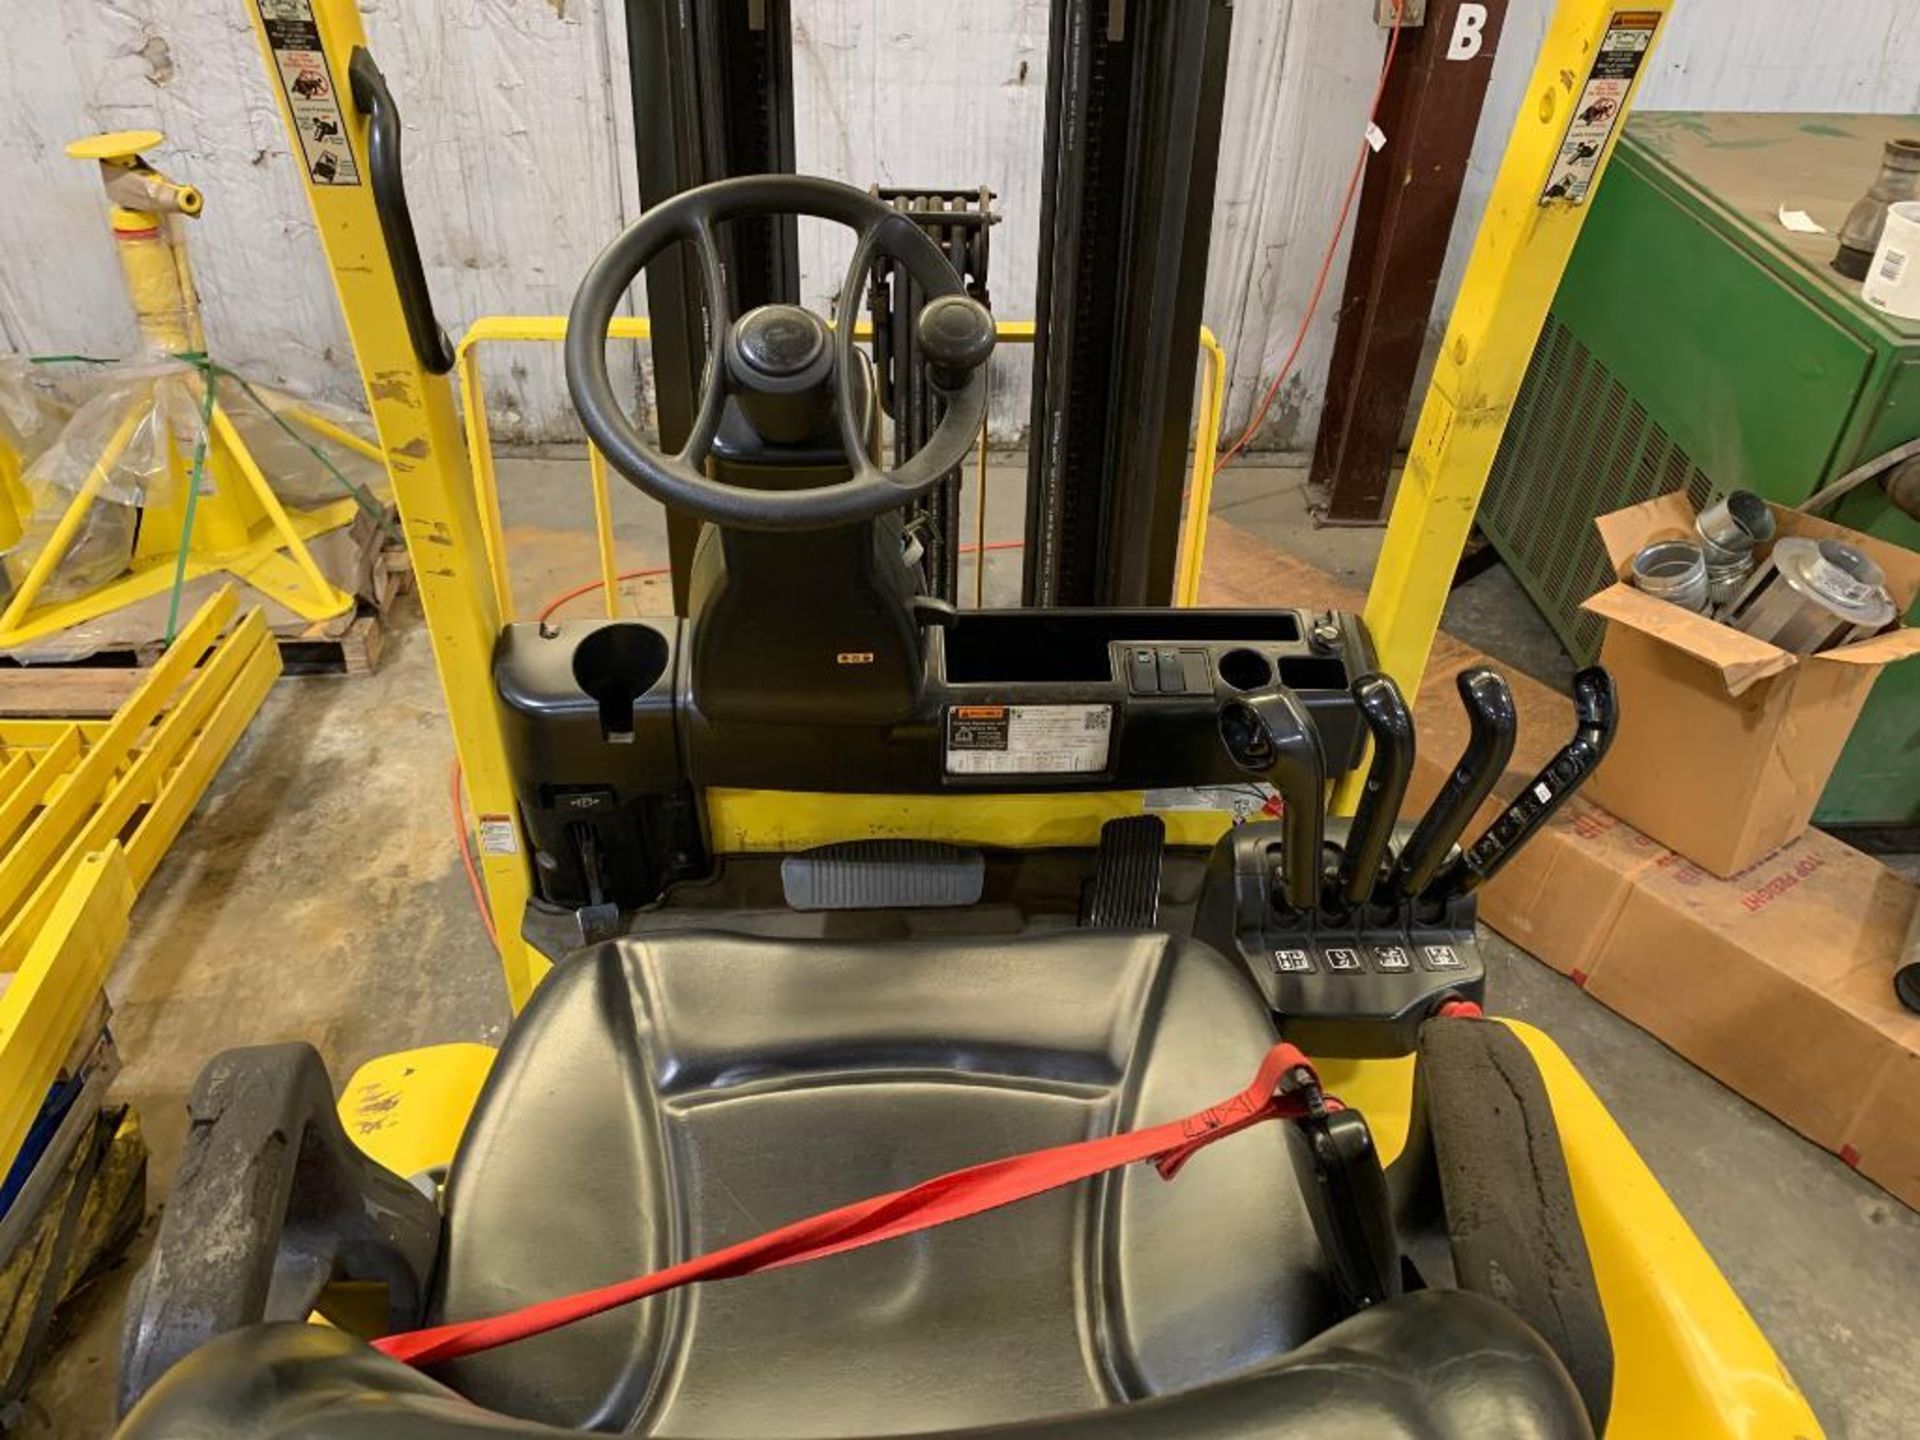 2018 Hyster 5,000 lb. capacity forklift, model e50xn, s/n a268n25355s, 36-volt electric w/ battery, - Image 5 of 5